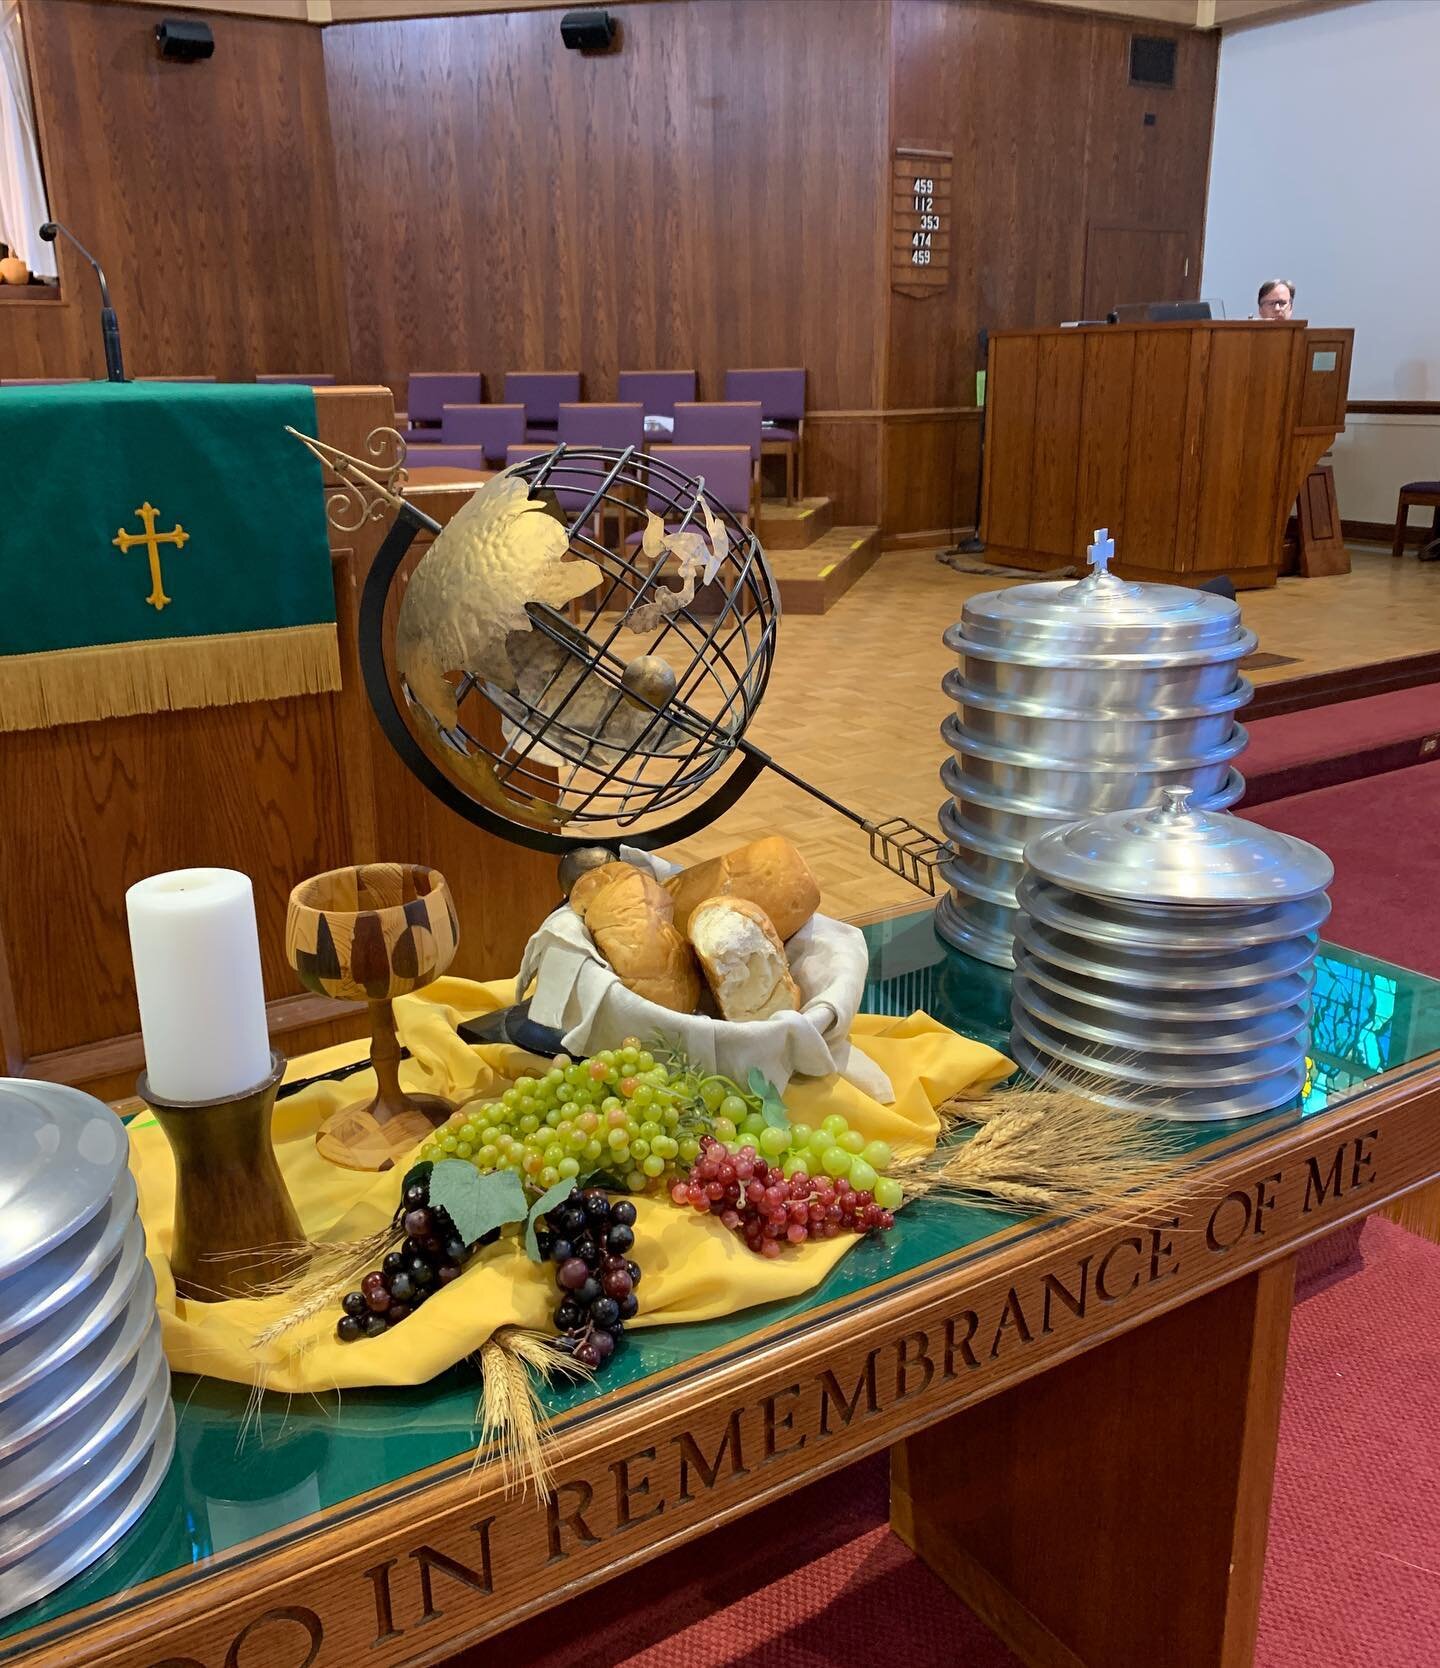 Last week at BCoB! We celebrated World Communion Sunday, the arrival of Autumn, and then on Wednesday we continued our discussion of Christian Nationalism. Will we see you tomorrow? The youth are making Chili and Cornbread for lunch. We&rsquo;ll save